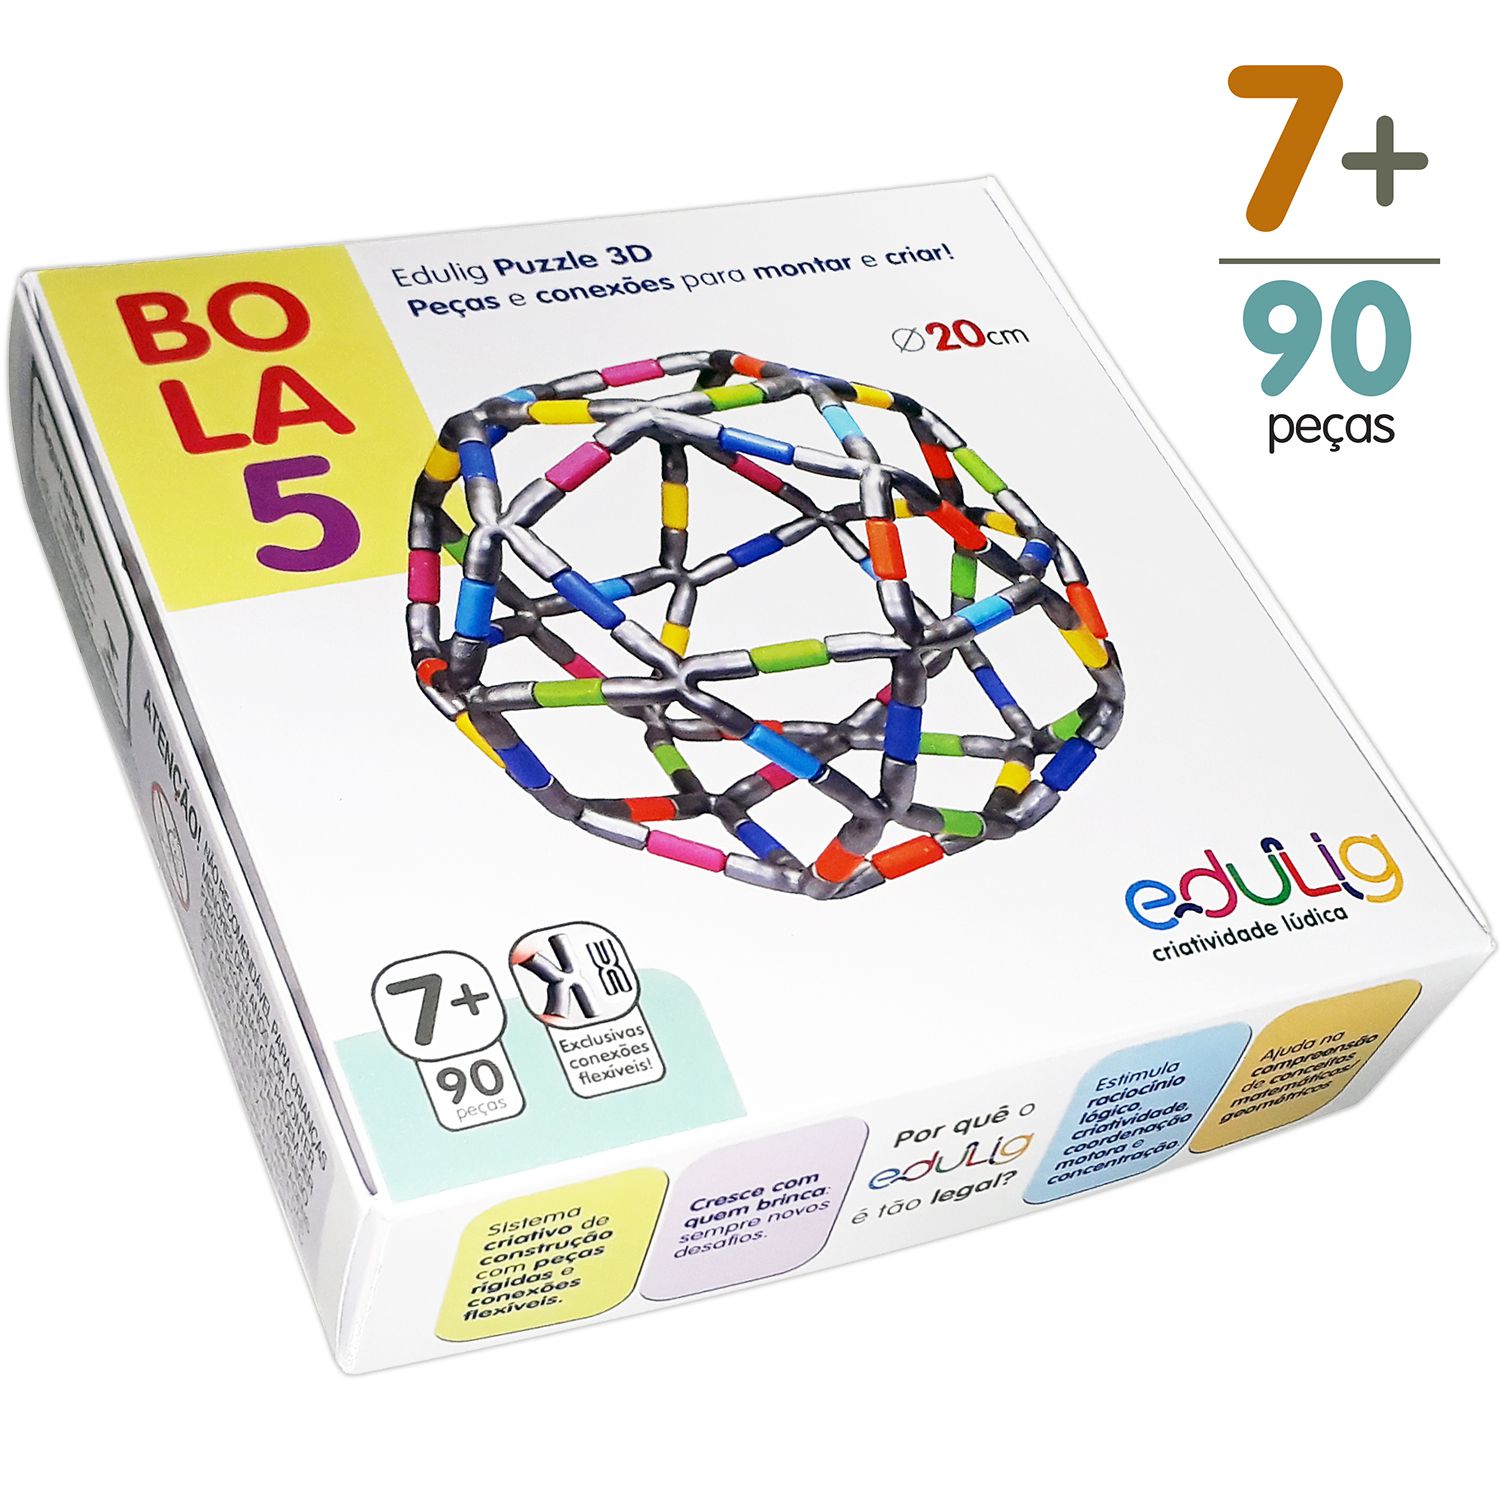 Puzzle 3D Bola H - Lalalume